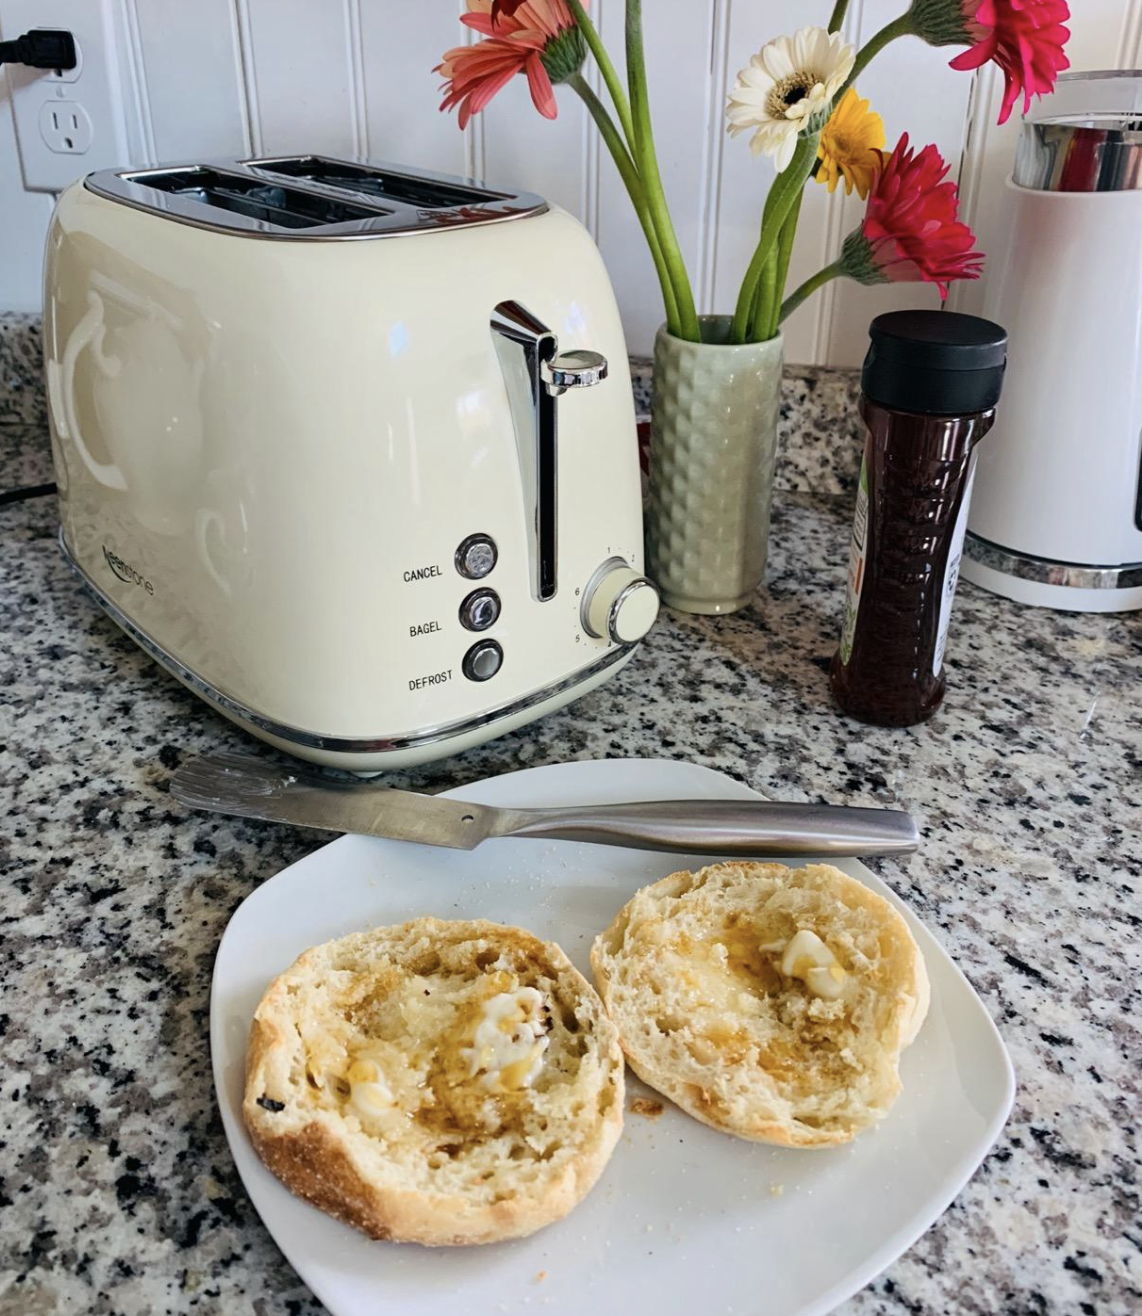 Reviewer image of a white/cream-colored toaster next to a freshly toasted English muffin